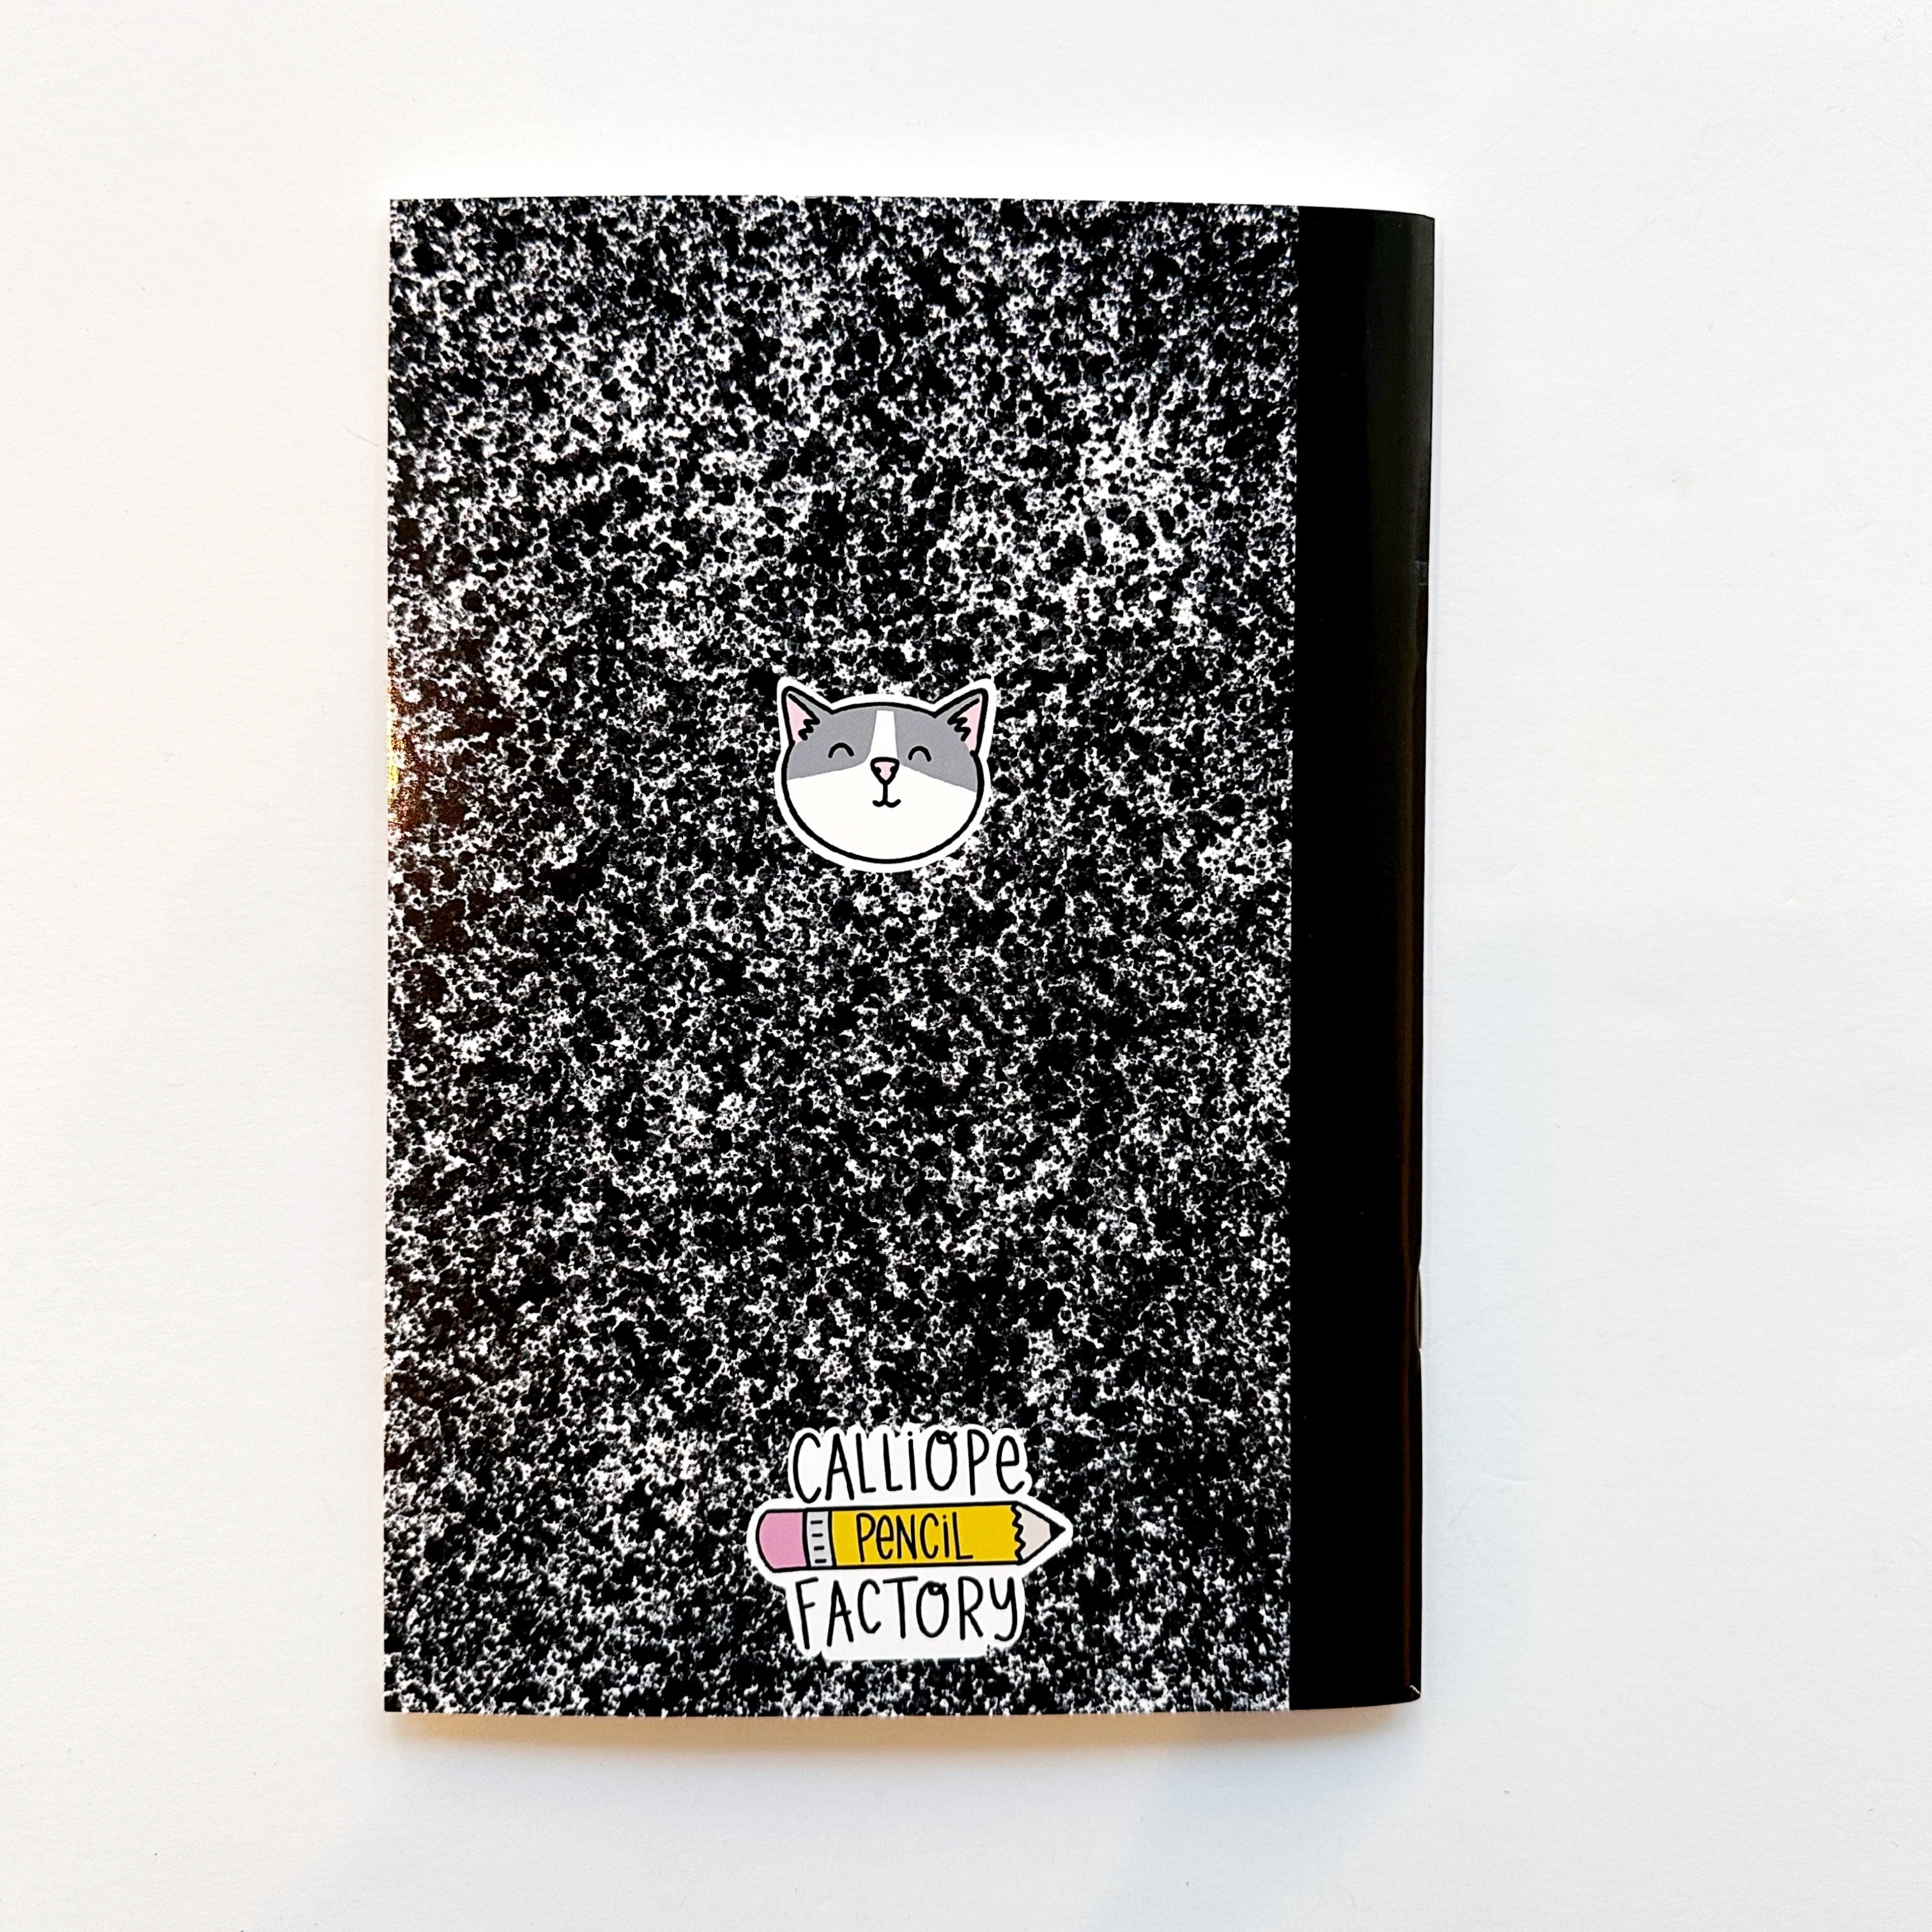 mage of black and white composition notebook as a sticker book with image of a grey and white cat face on back.